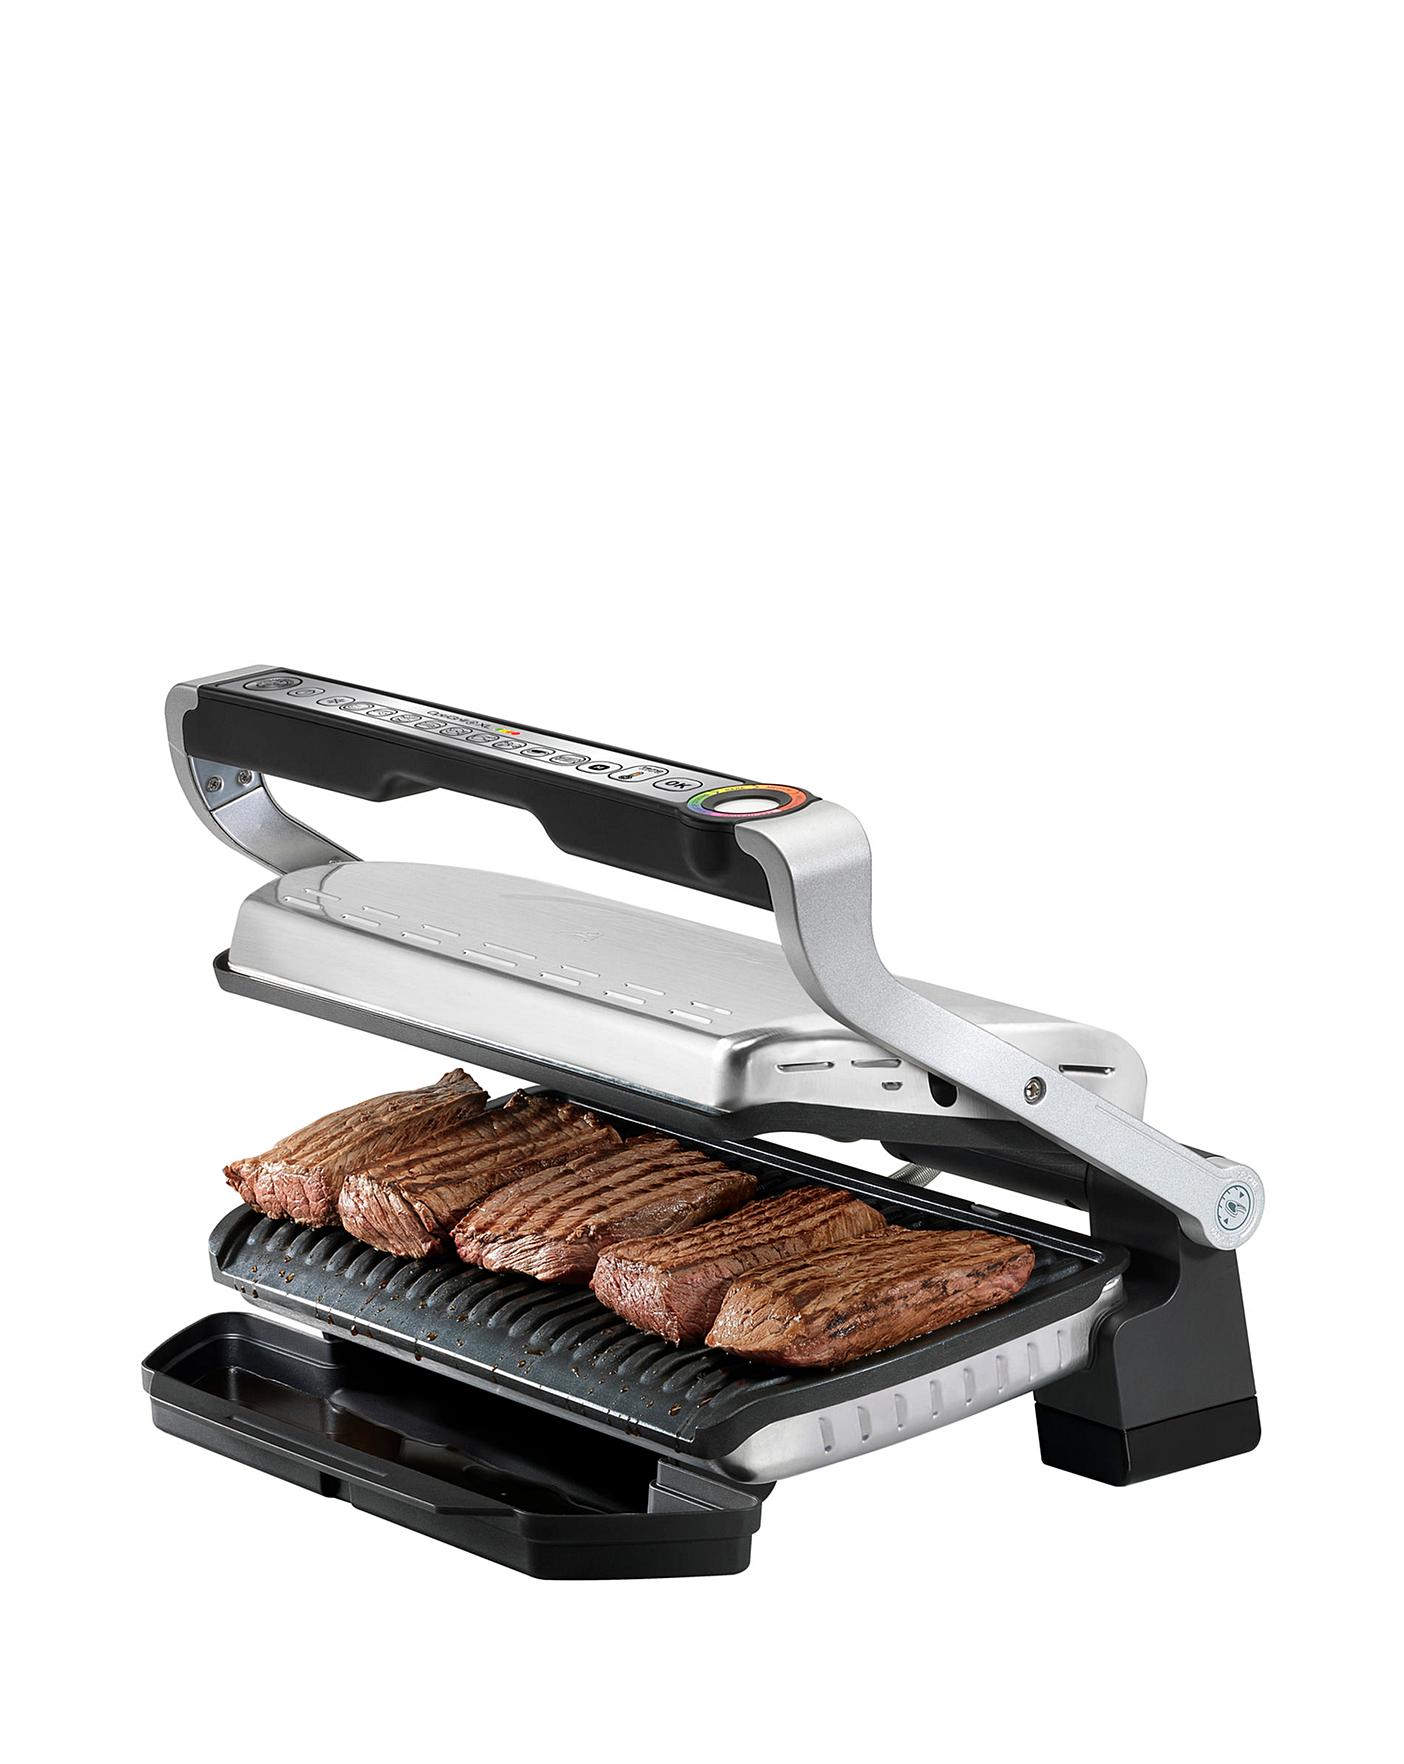 Tefal OptiGrill Plus XL Smart Grill Stainless Steel GC722